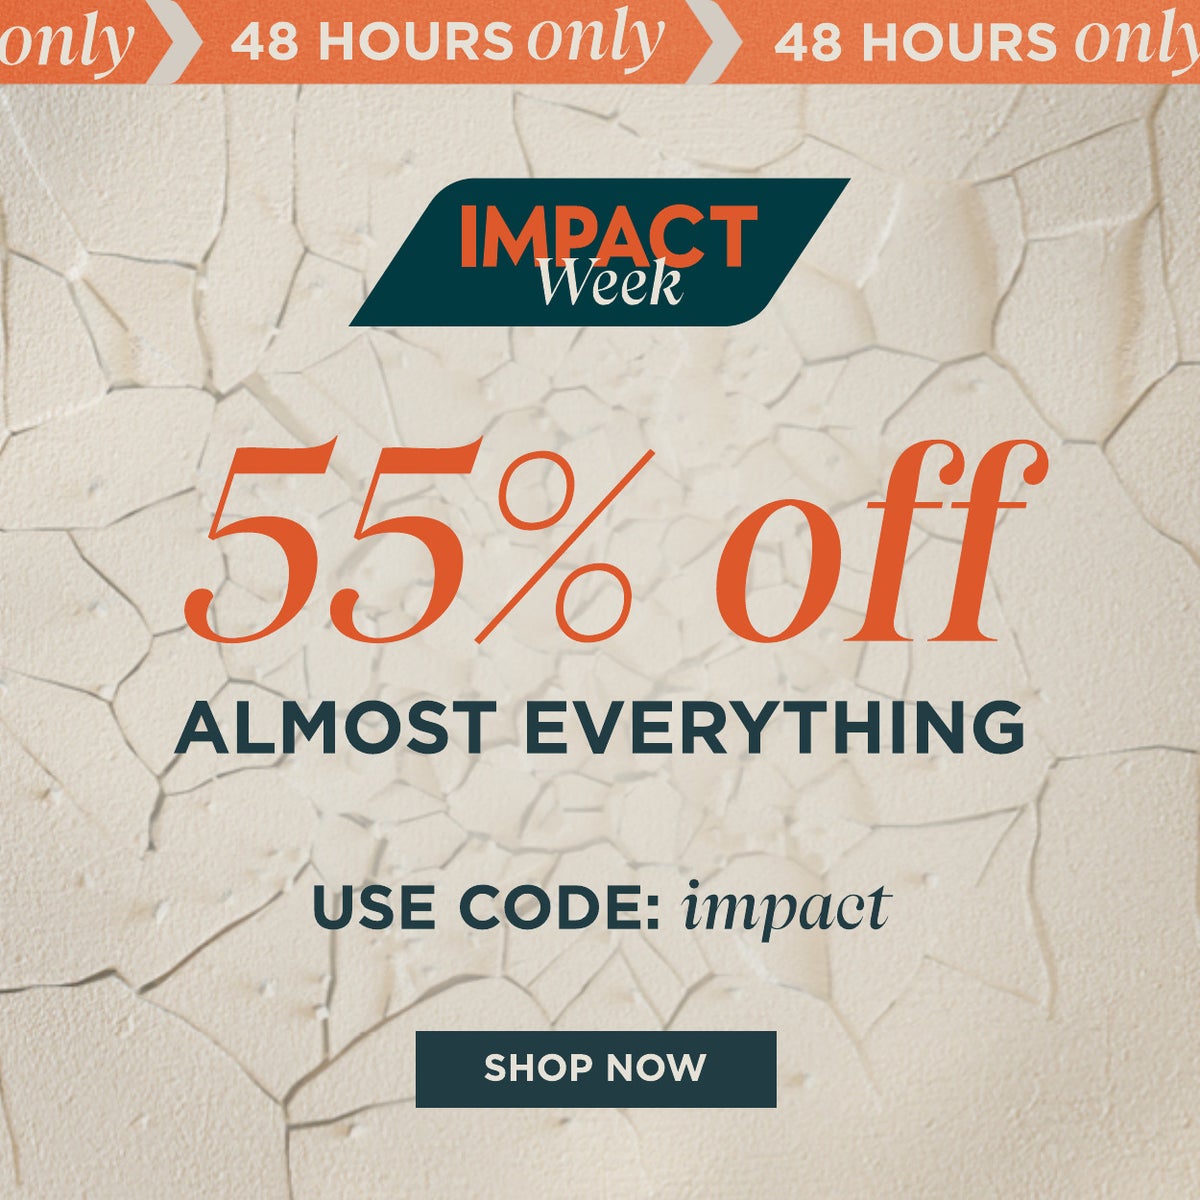 Impact week. Impact week up to 55% off. Use code: Impact. shop now.